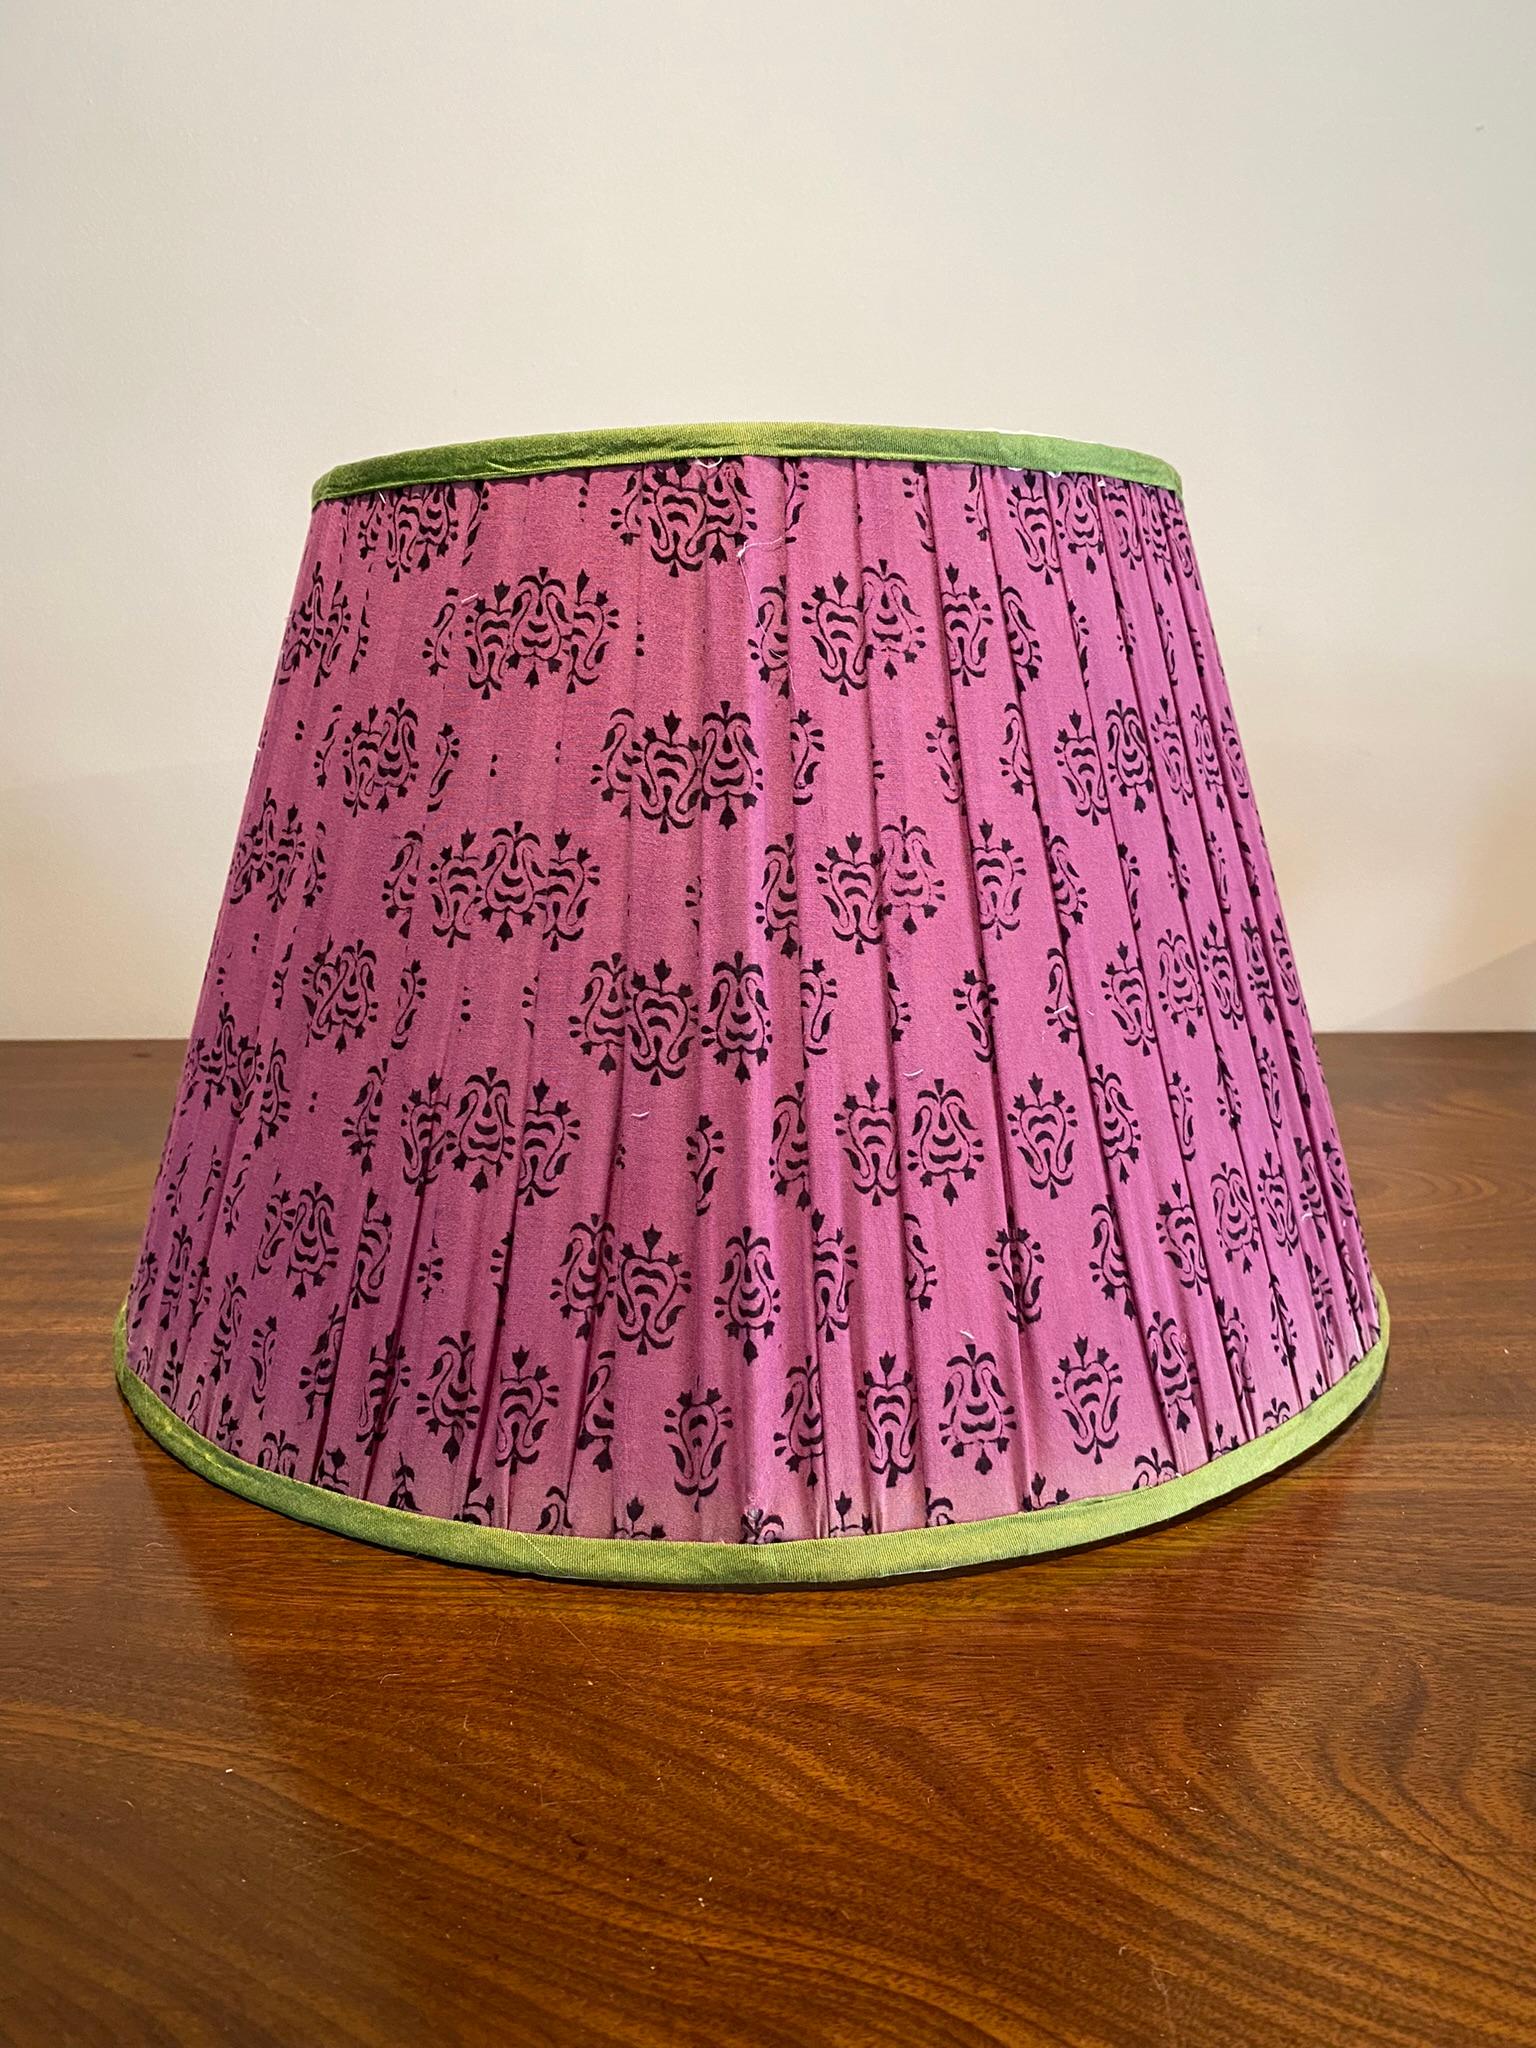 18” Indian sari lampshade with duplex fitting.

These are handmade lampshades made from Indian sari silks and cotton.

Due to the fact these shades are on display in my showroom and their delicate nature, they occasionally show signs of handling